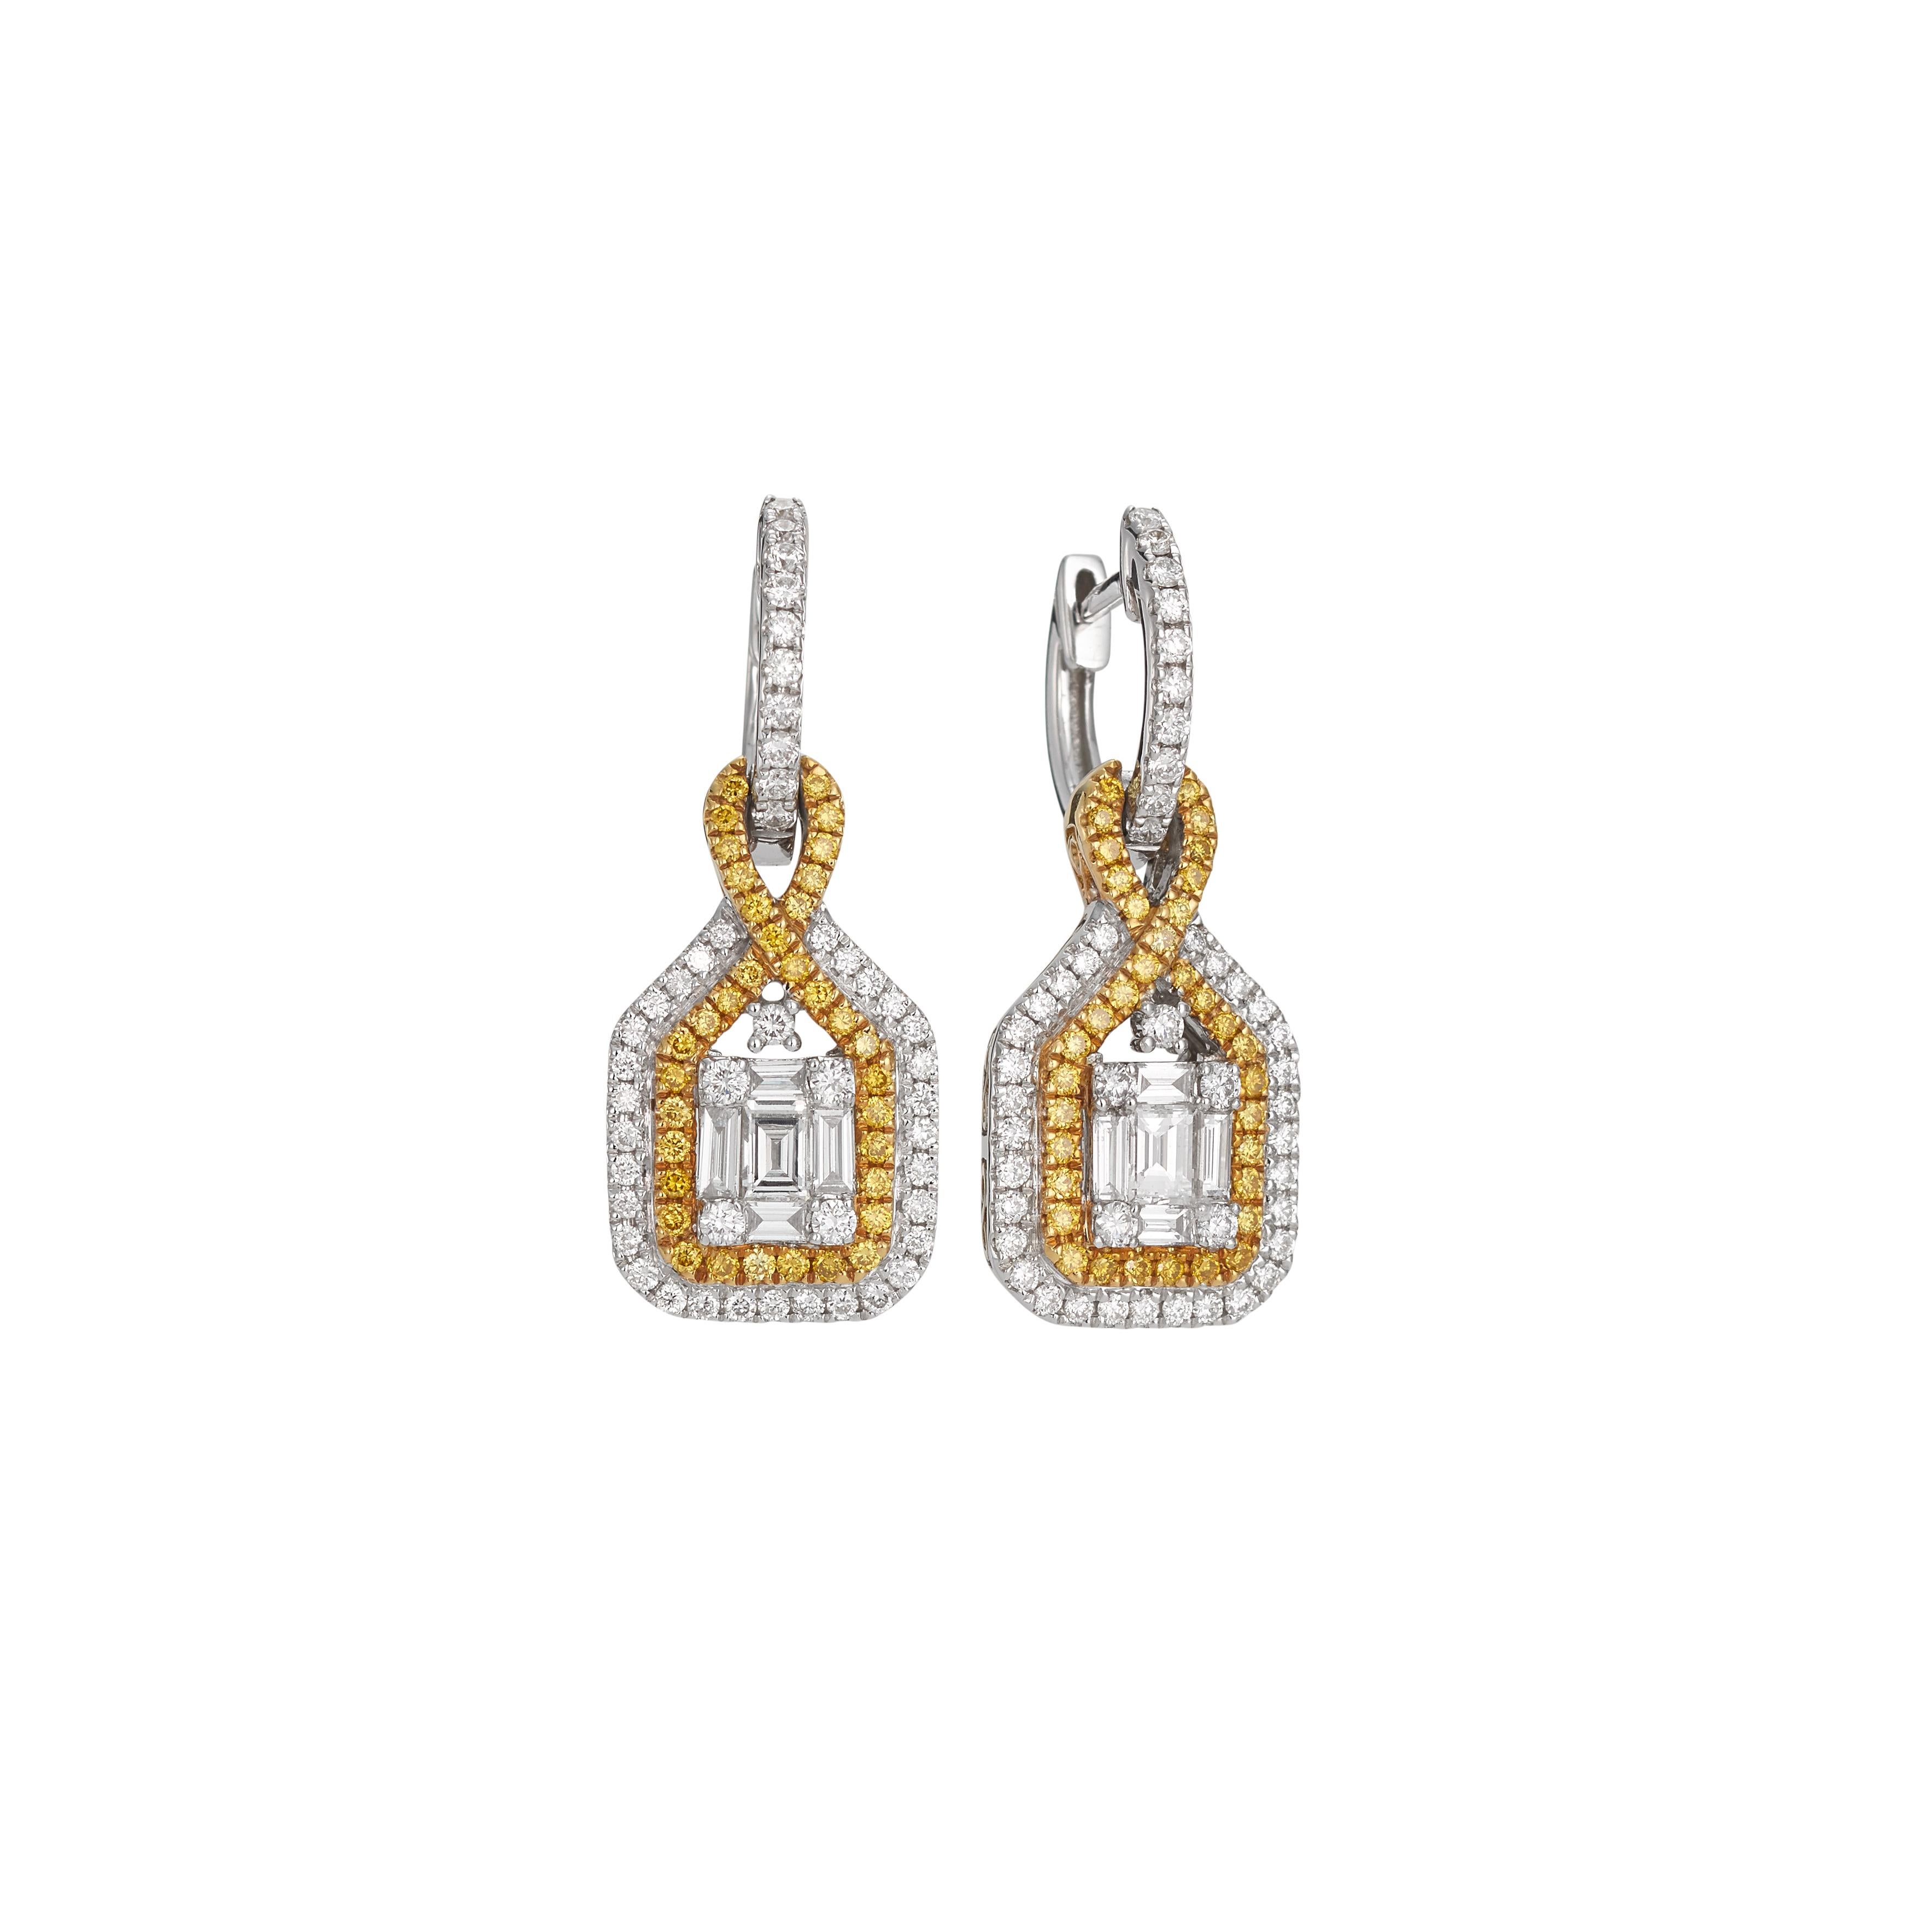 Beautiful drop earrings showcasing fancy yellow diamonds and white brilliant diamonds, set in 18k yellow and white gold. The yellow diamonds total .34 carats and the white diamonds total 1.03 carats.There are micro pave diamonds on the hoops.